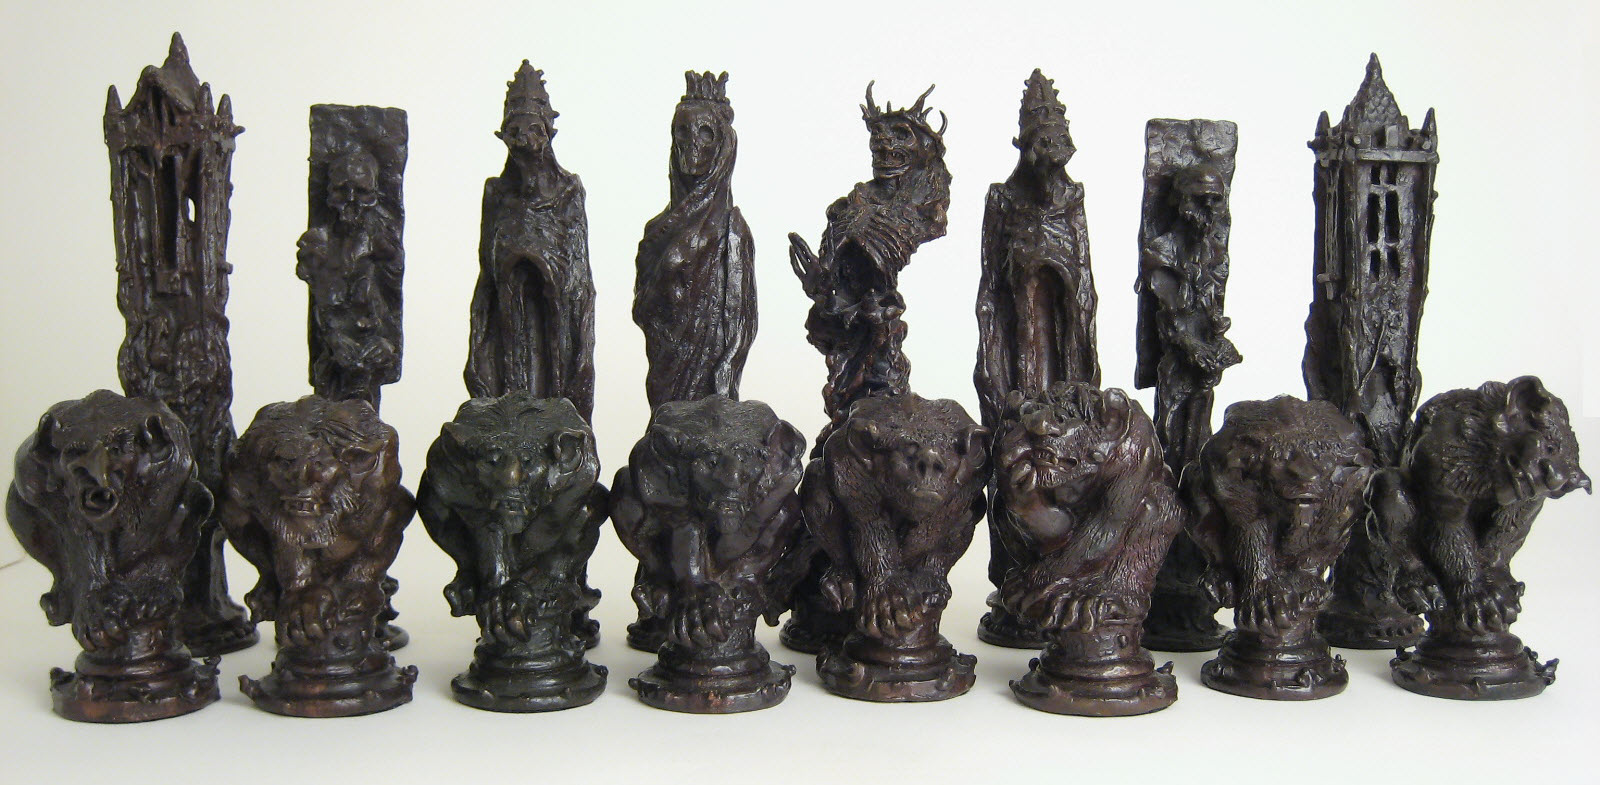 Black pieces from the Bill Girard Lord of the Rings Chess Set (Bronze)